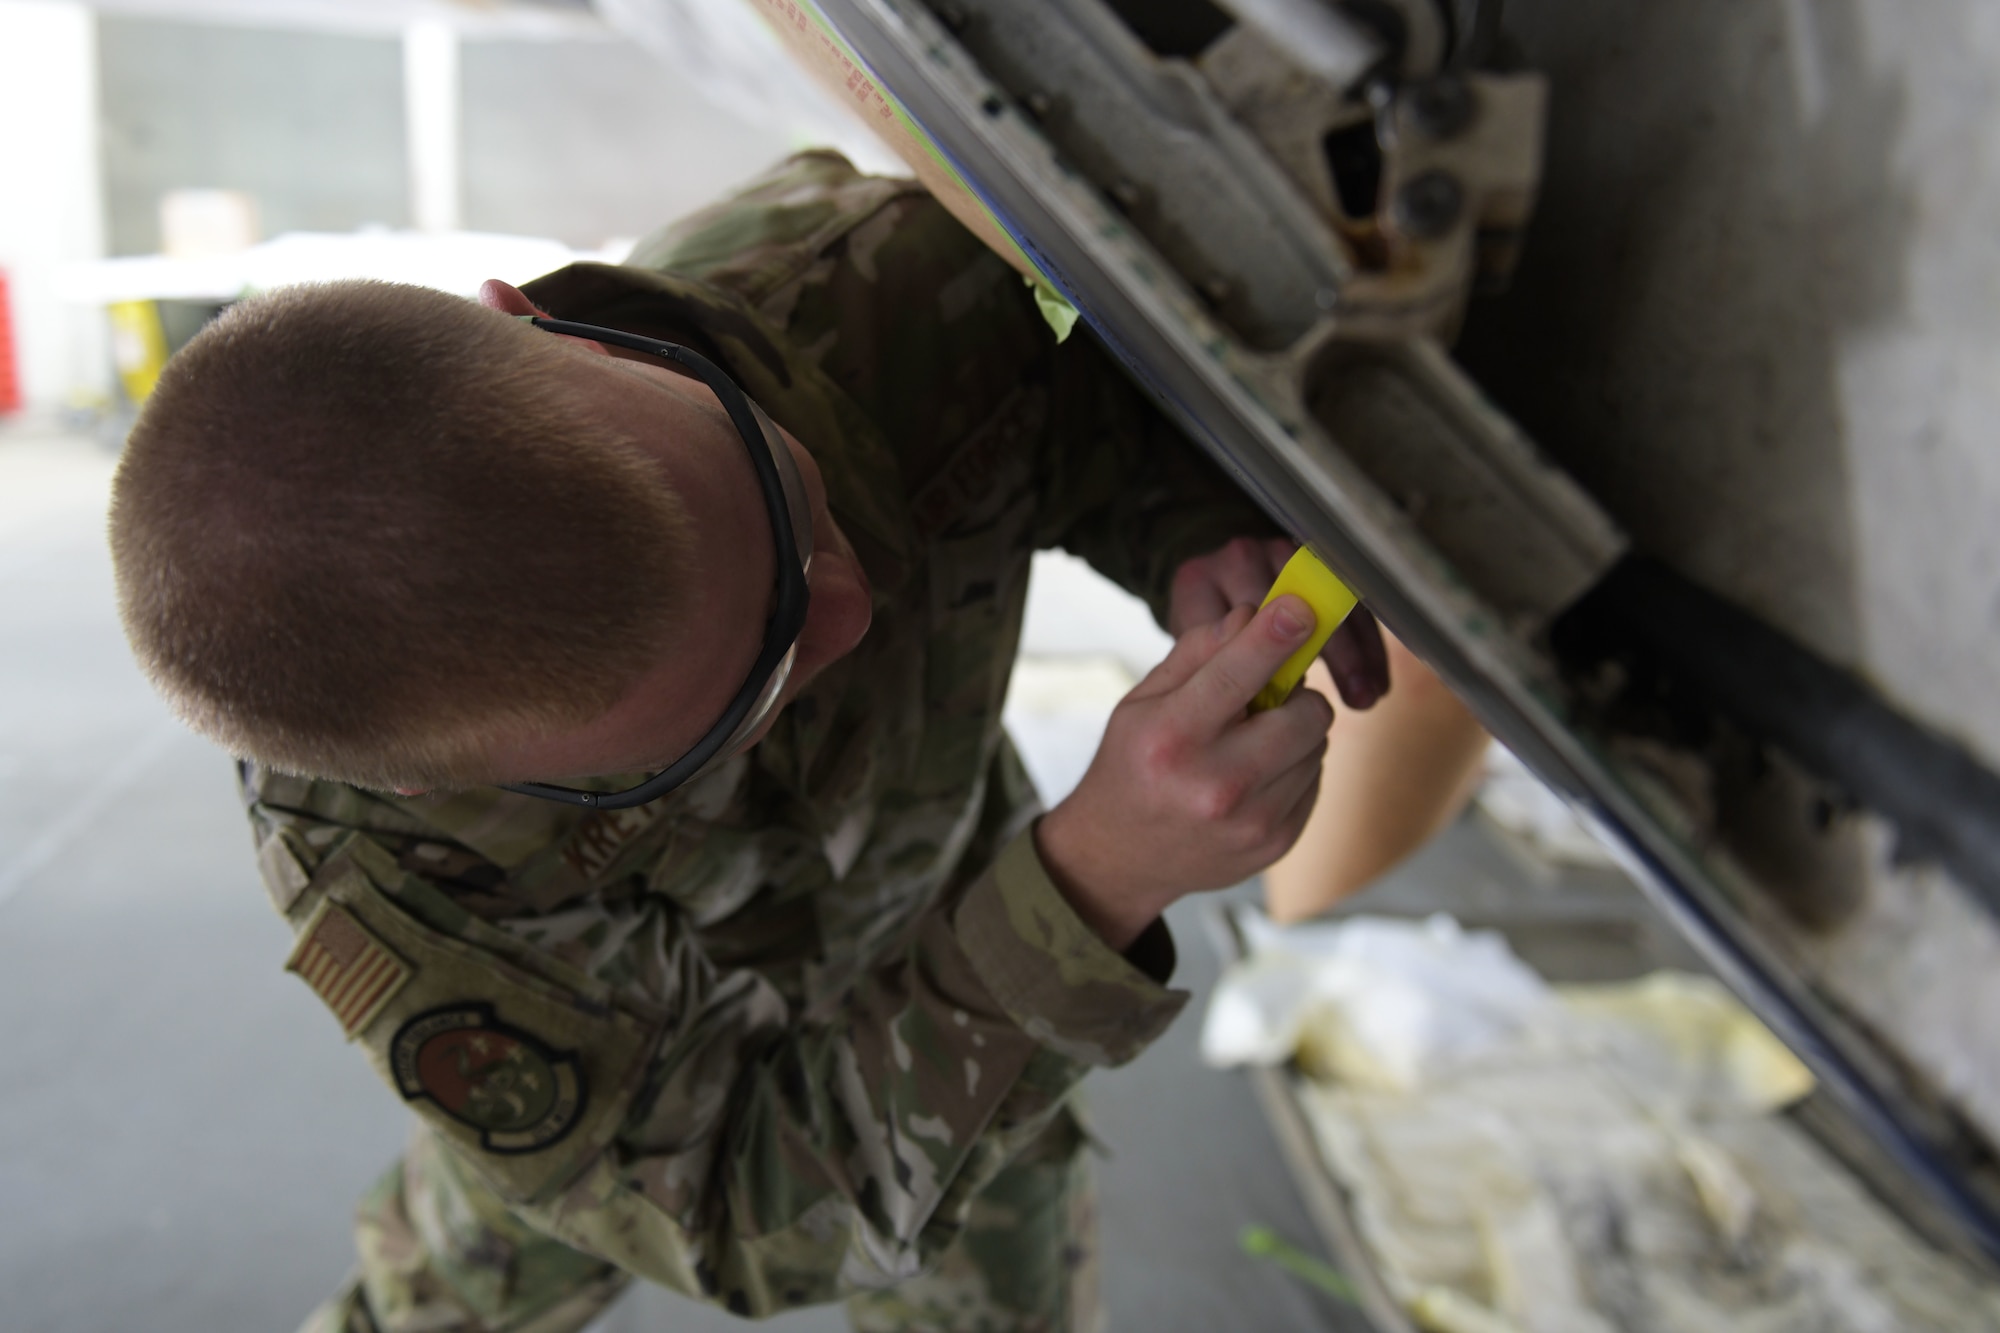 U.S. Air Force Senior Airman William Kretzer, 325th Maintenance Squadron low observable journeyman, scrapes paint from an F-22 Raptor at Tyndall Air Force Base, Florida, March 28, 2022.